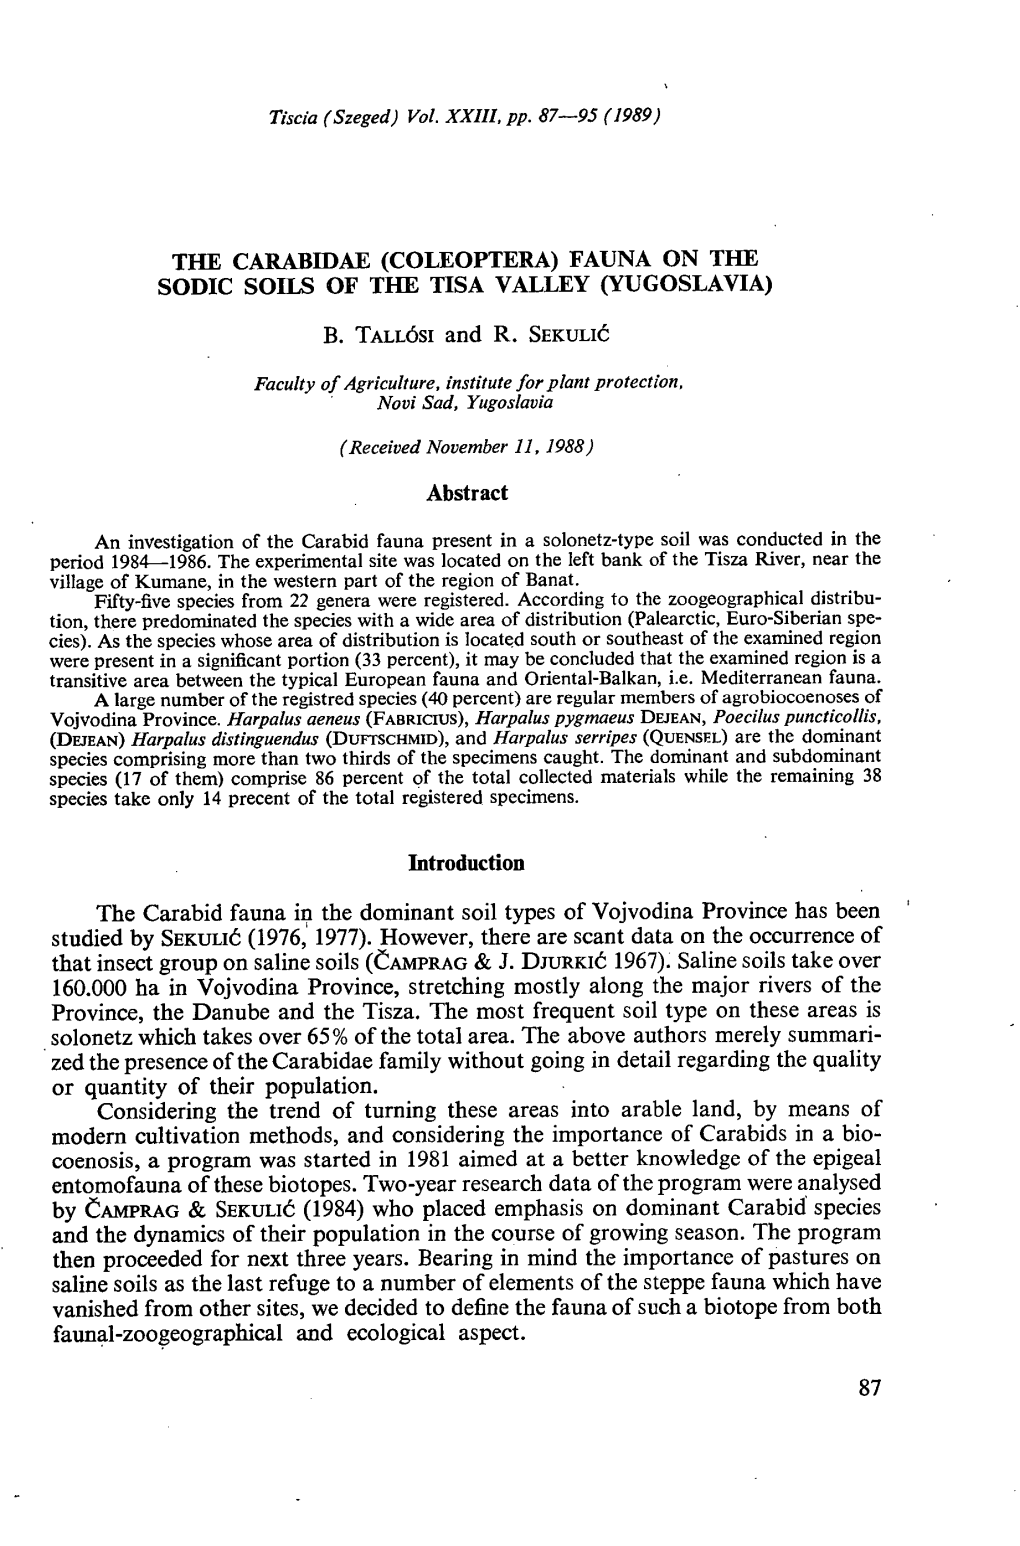 THE CARABIDAE (COLEOPTERA) FAUNA on the SODIC SOILS of the TISA VALLEY (YUGOSLAVIA) Abstract Introduction the Carabid Fauna in T